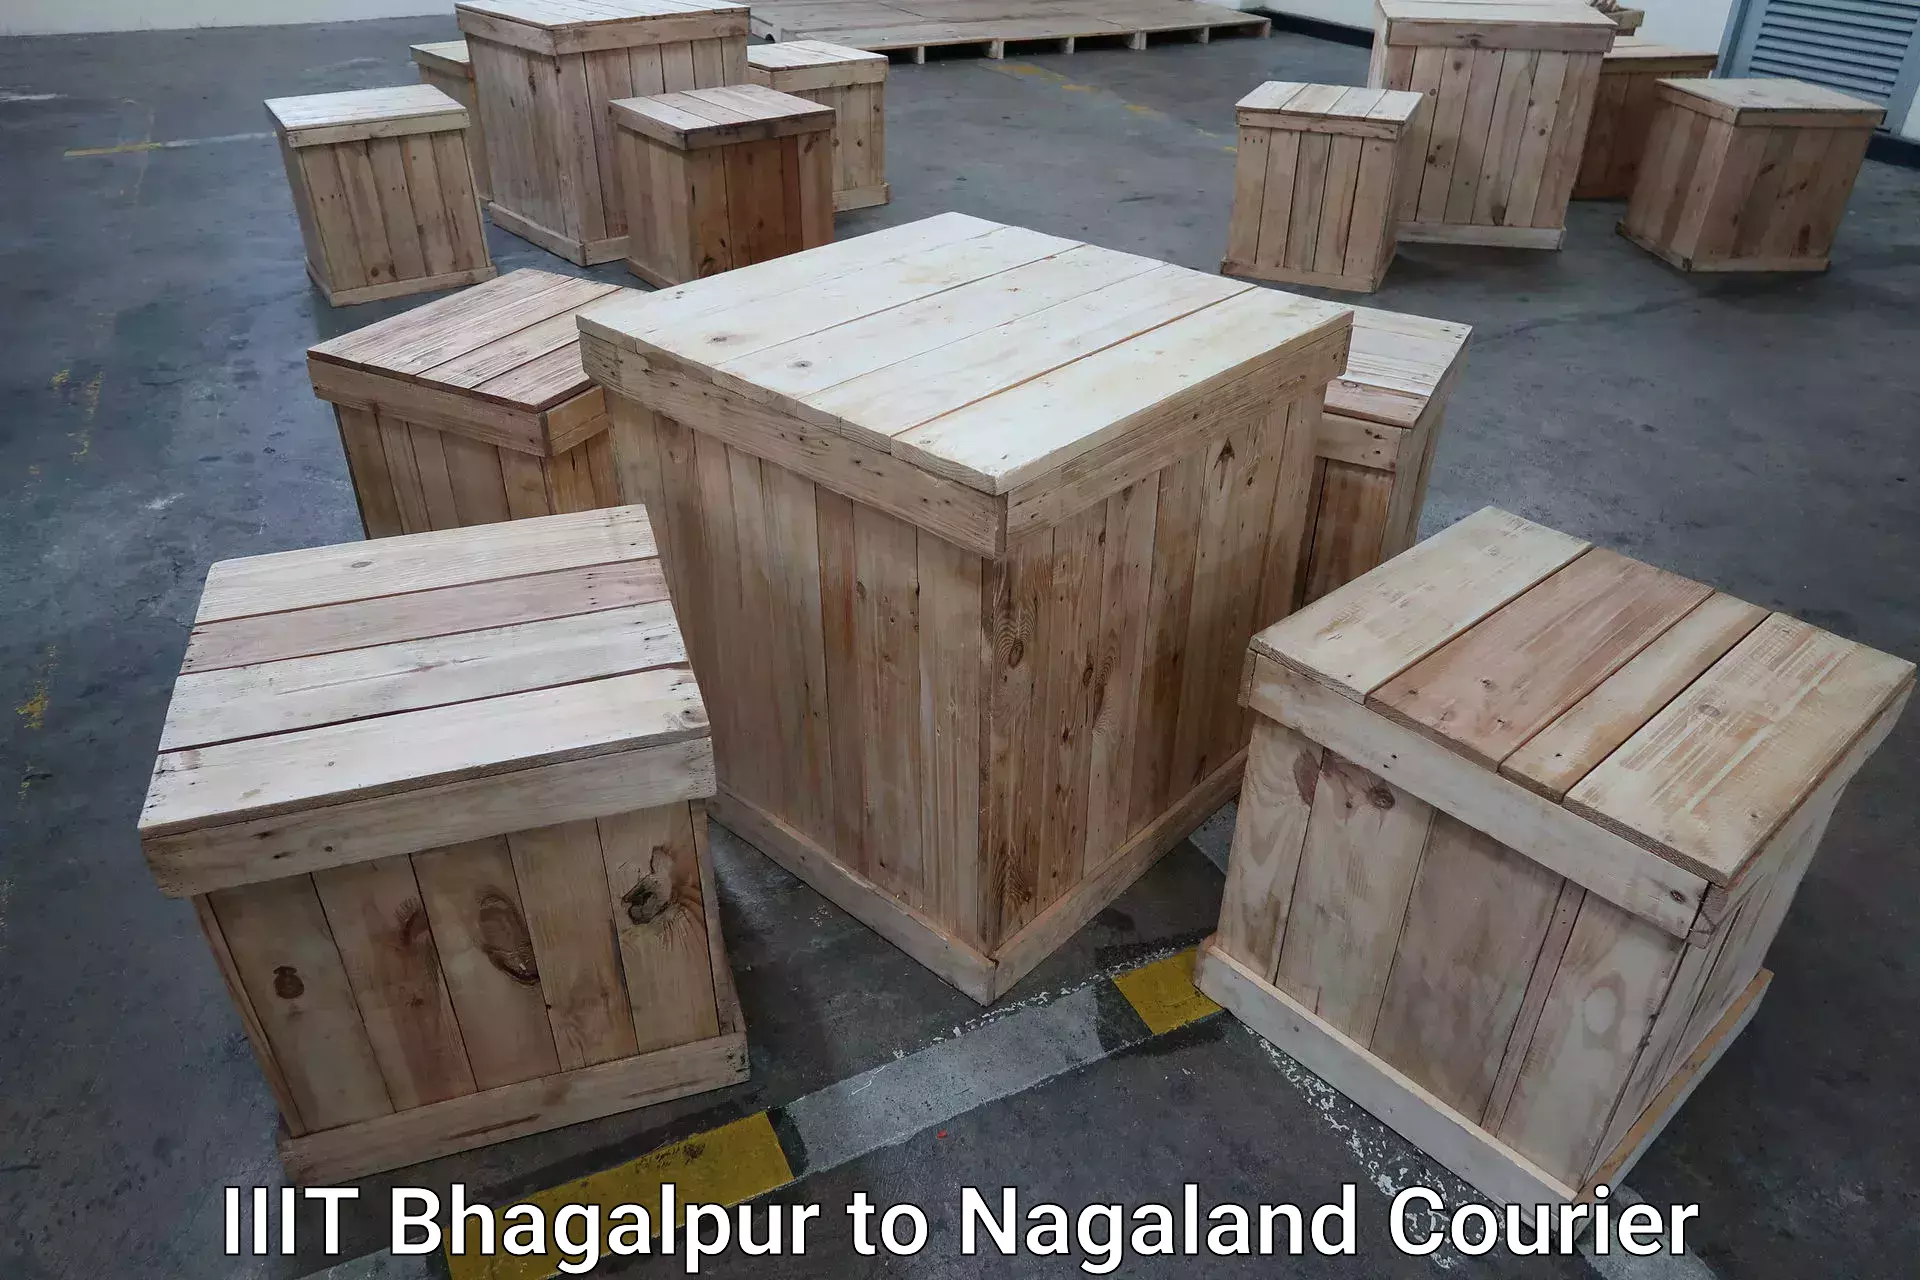 Baggage delivery scheduling in IIIT Bhagalpur to Dimapur